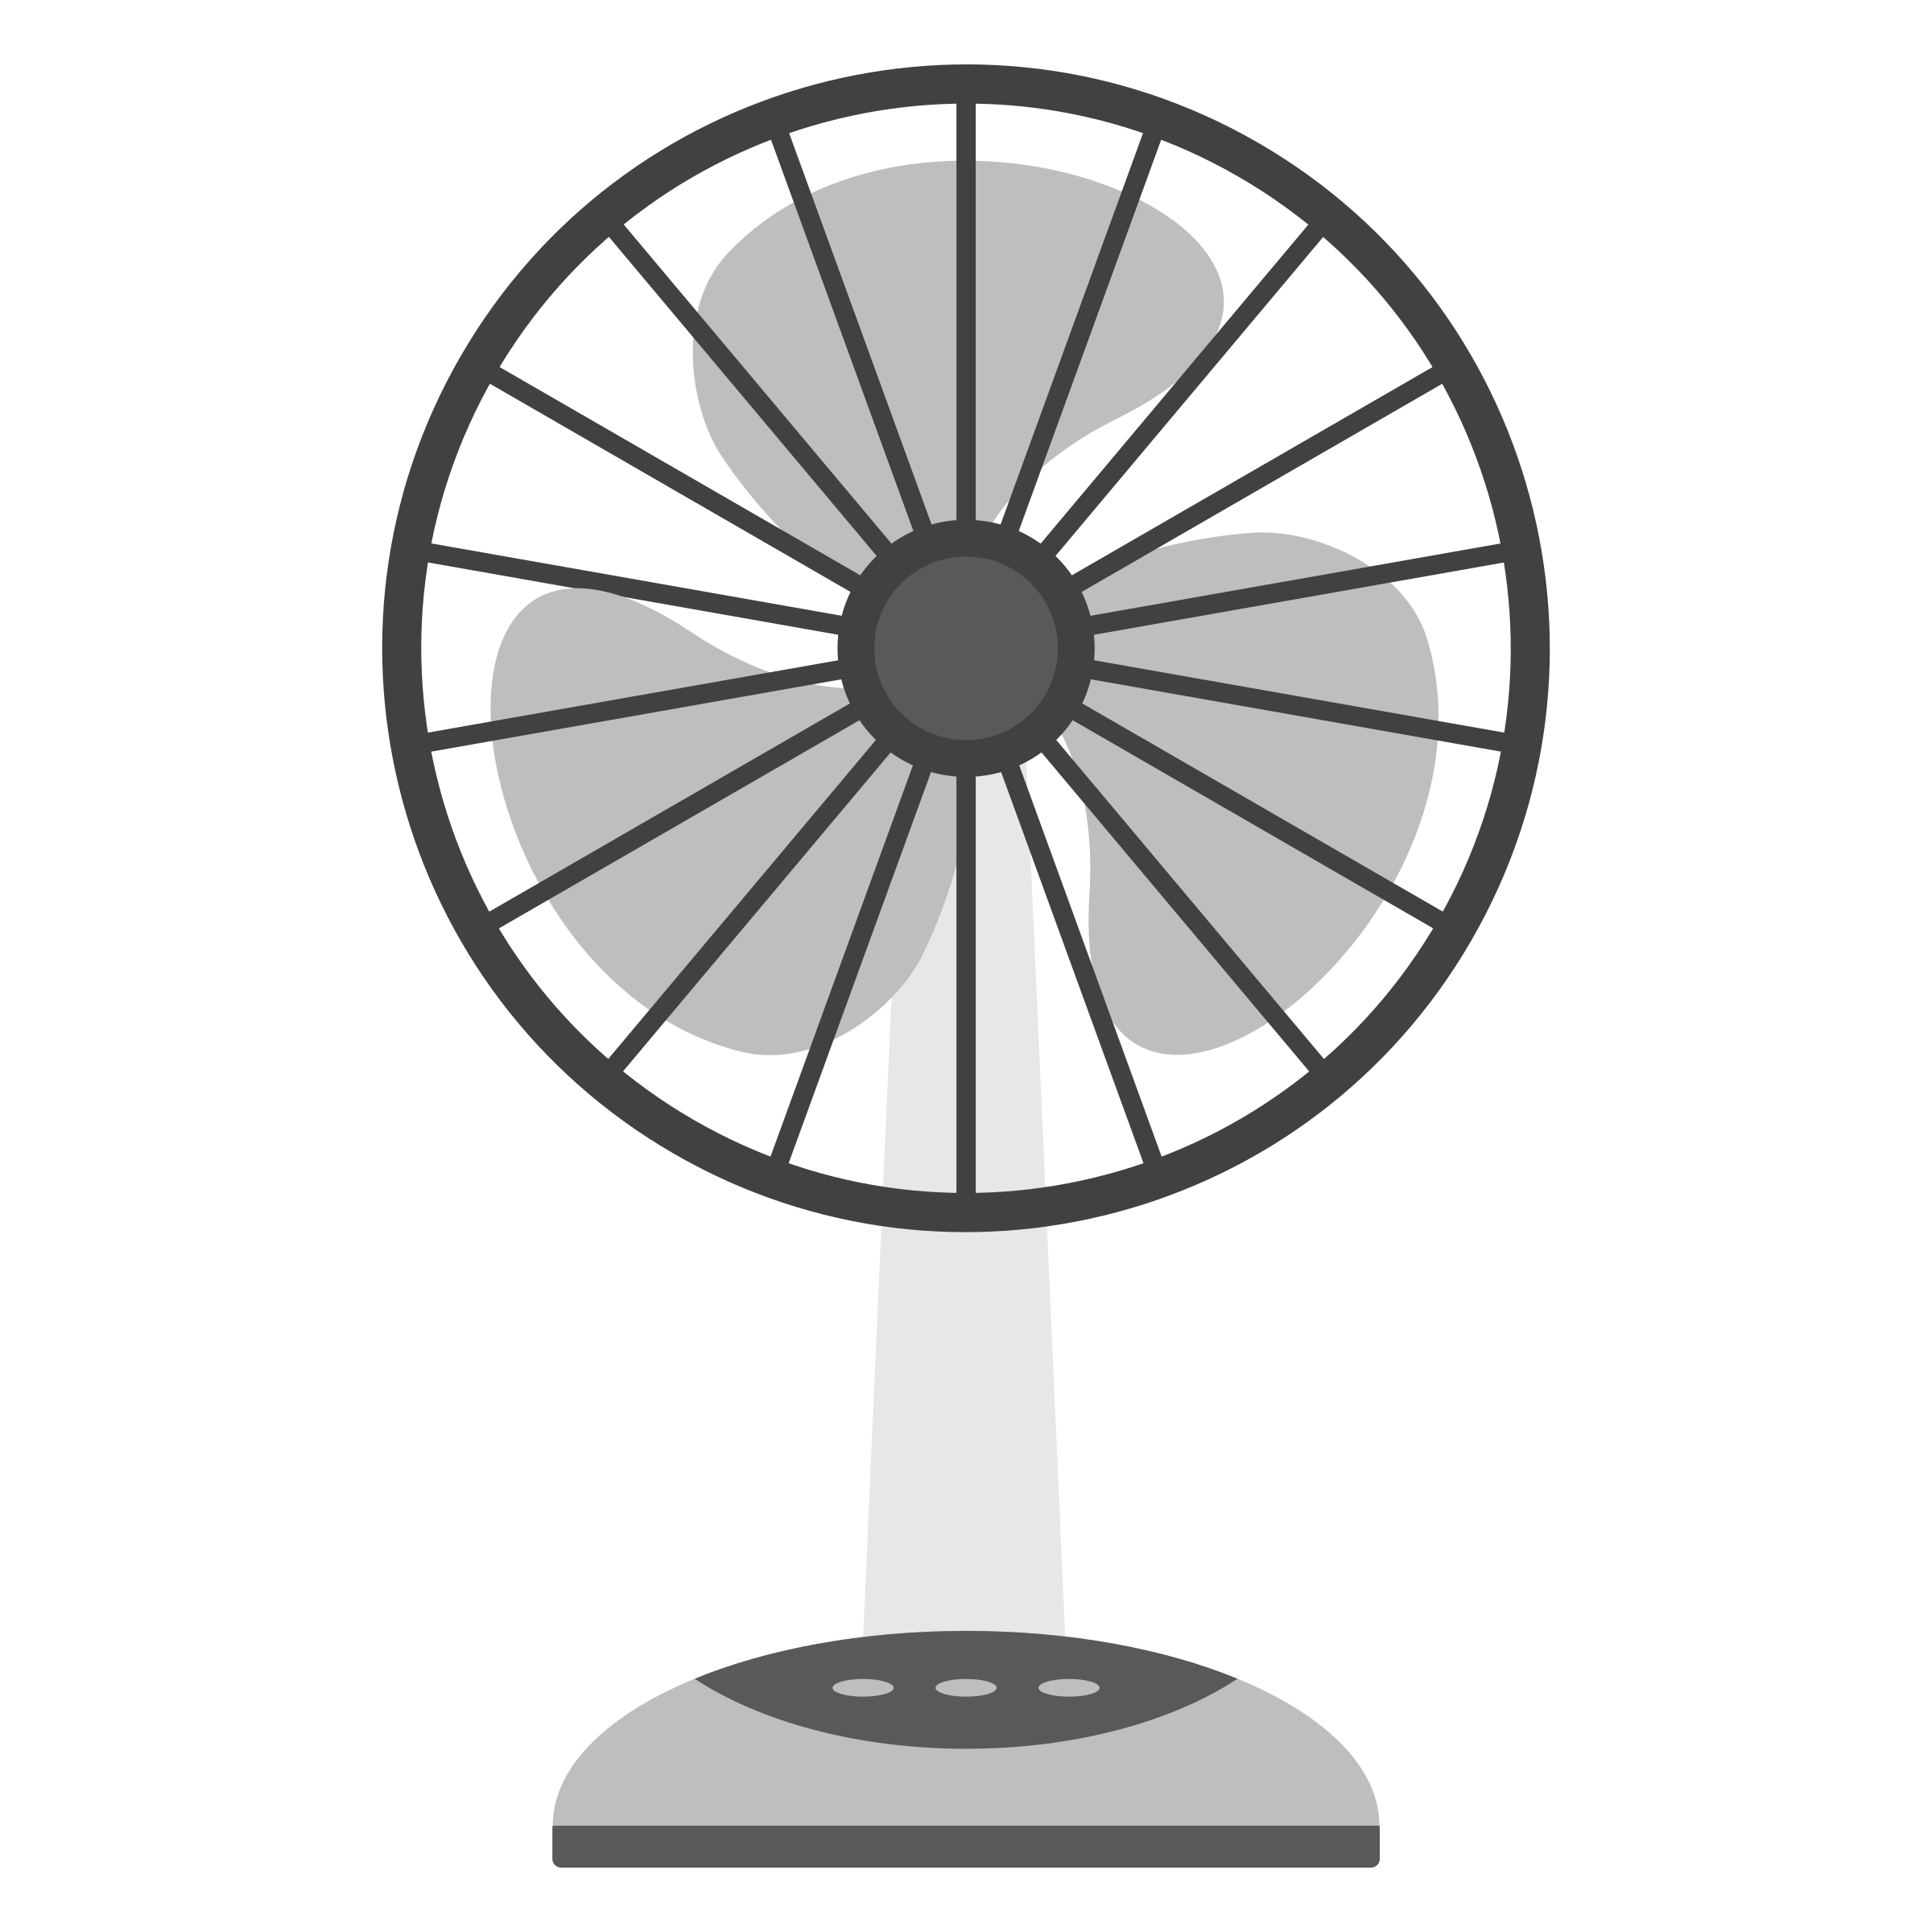 electric fan vector clipart image photo #16884